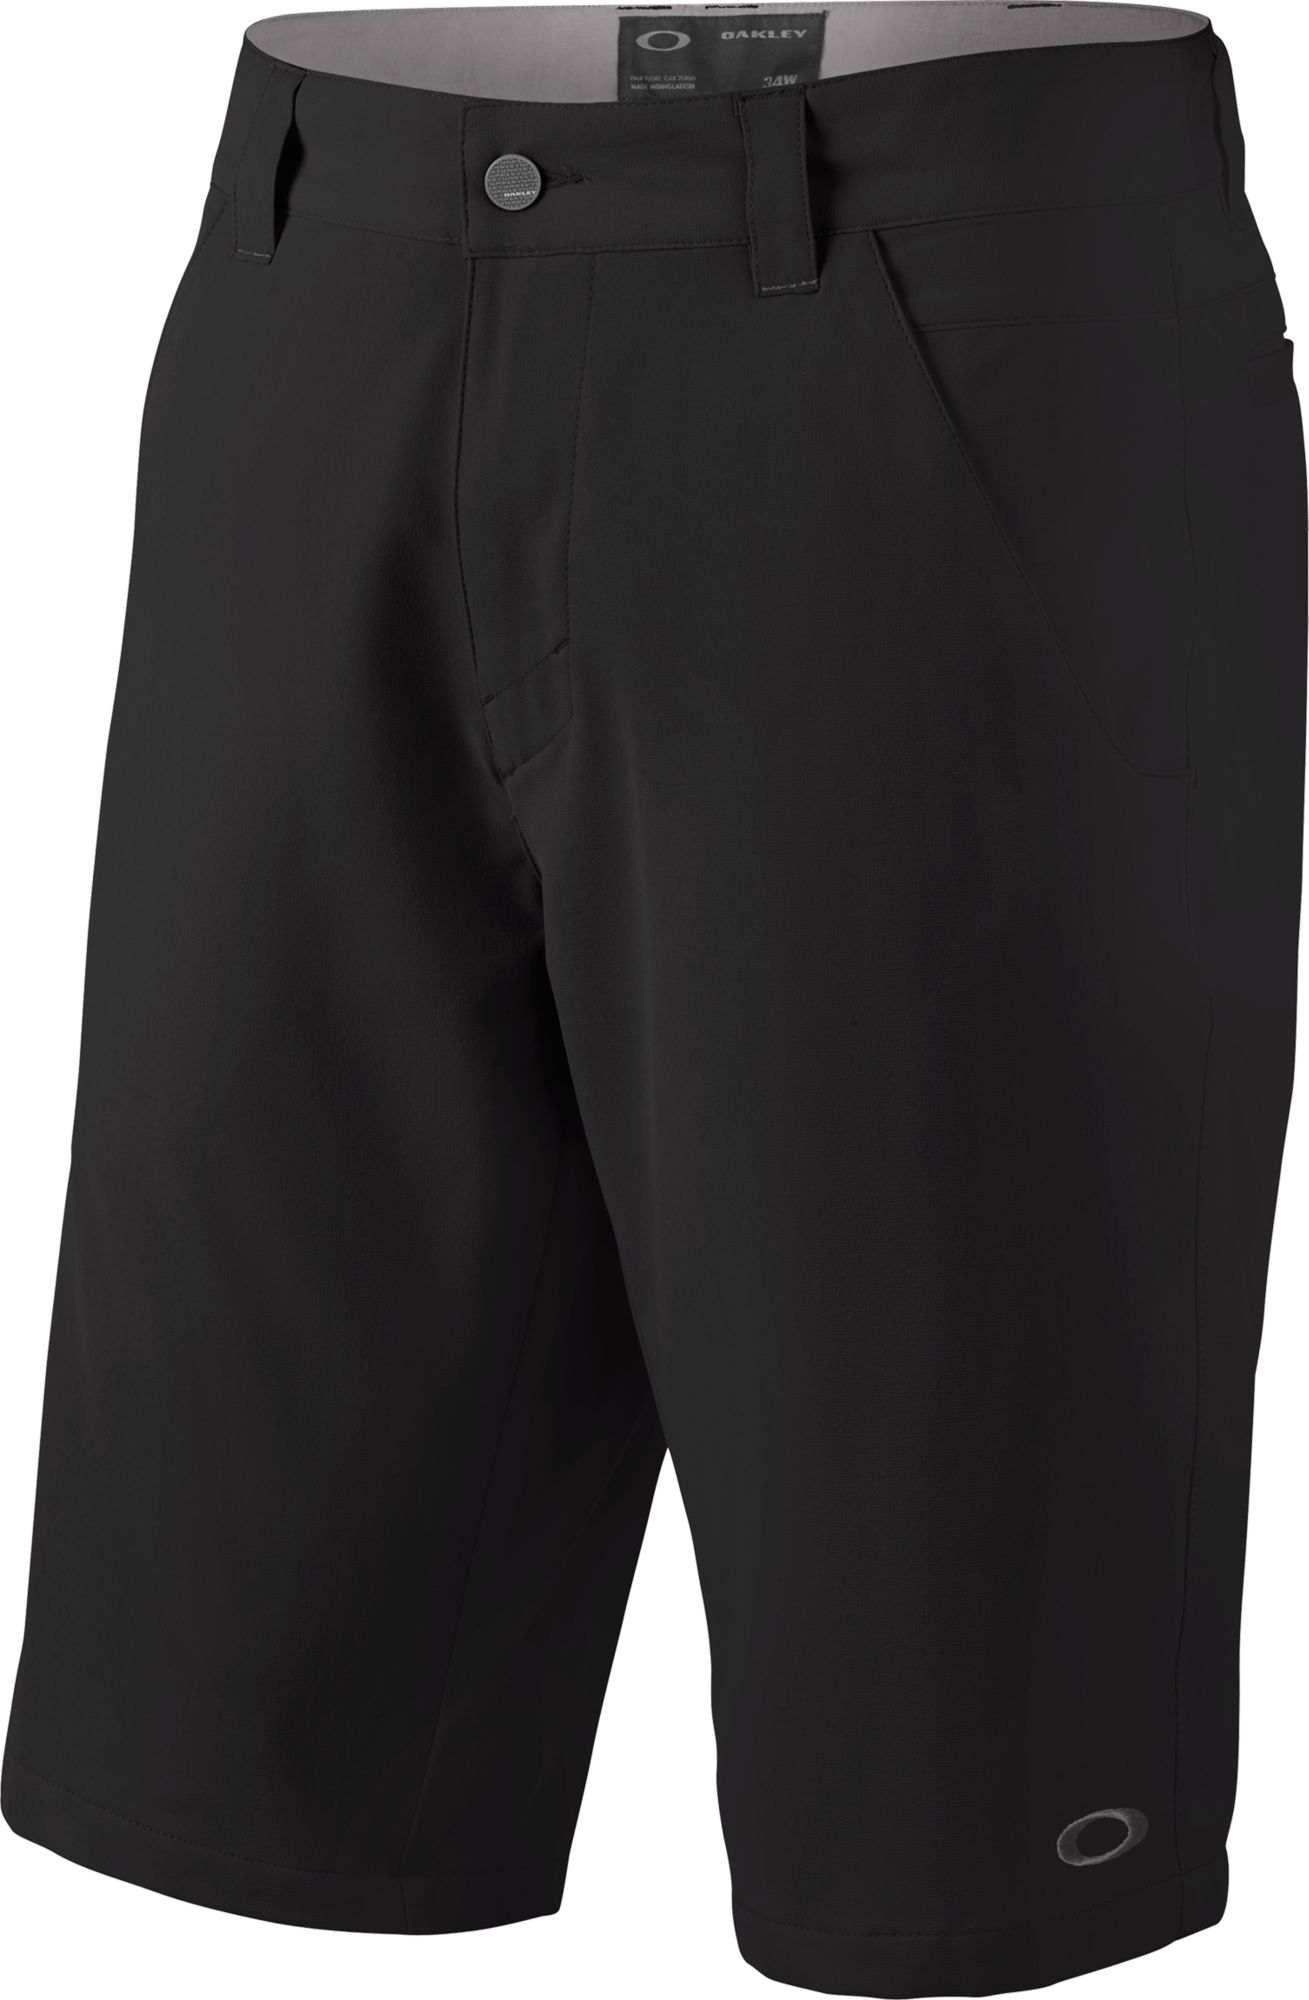 Men's 12 Inch Inseam Gym Shorts | DICK'S Sporting Goods